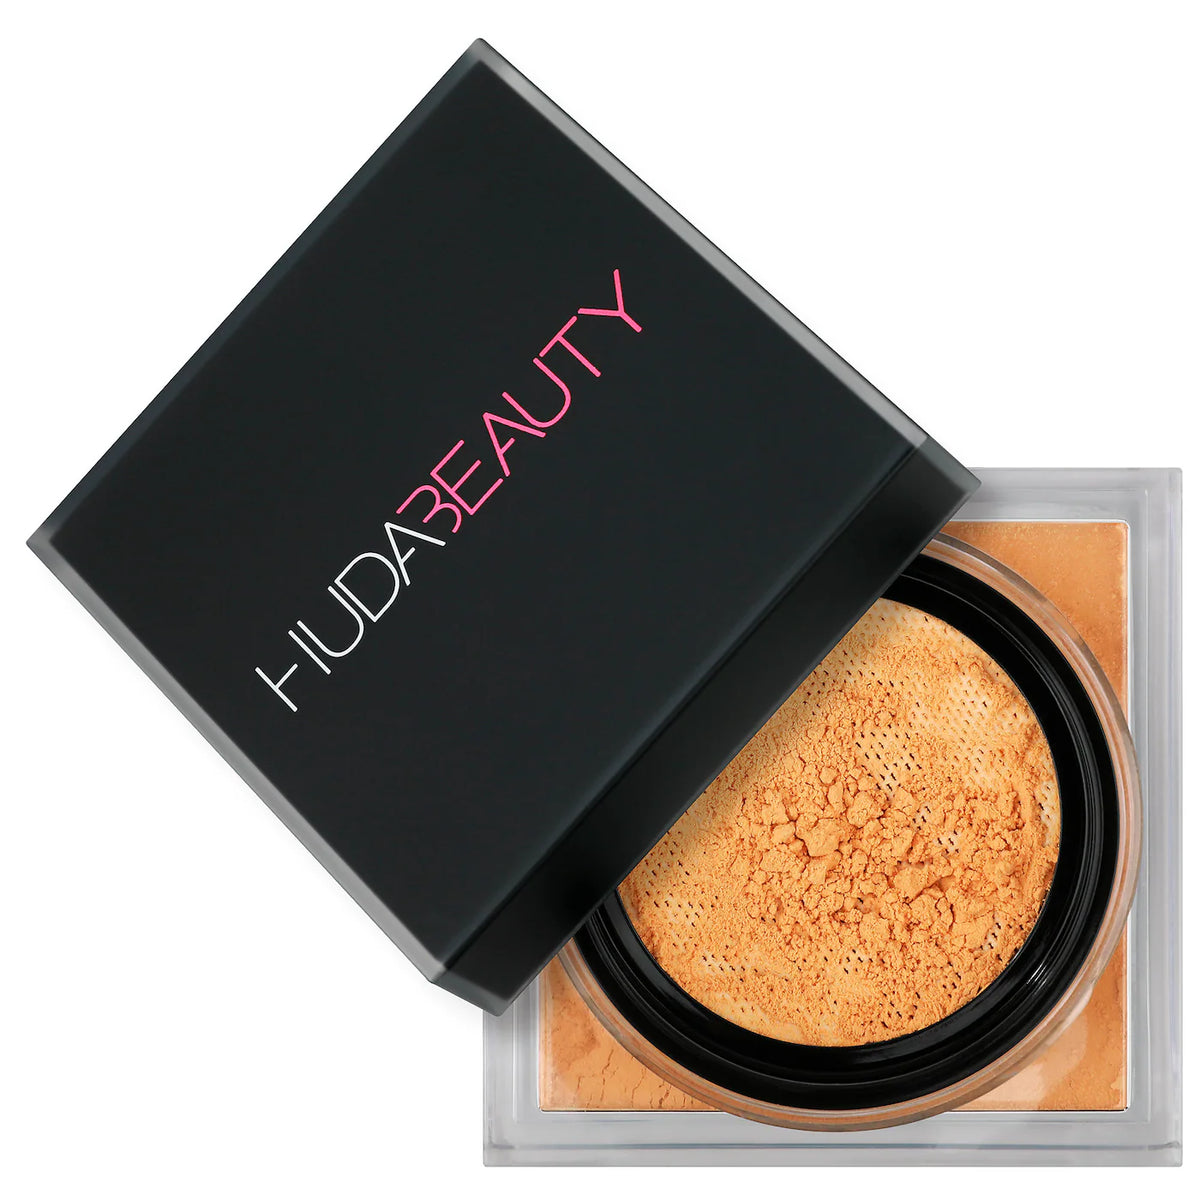 Huda Beauty Easy Bake Loose Baking & Setting Powder Full size Setting powder Huda Beauty Kunafa - deep tan and rich skin tones. golden undertones brighten and disguise under-eye darkness  